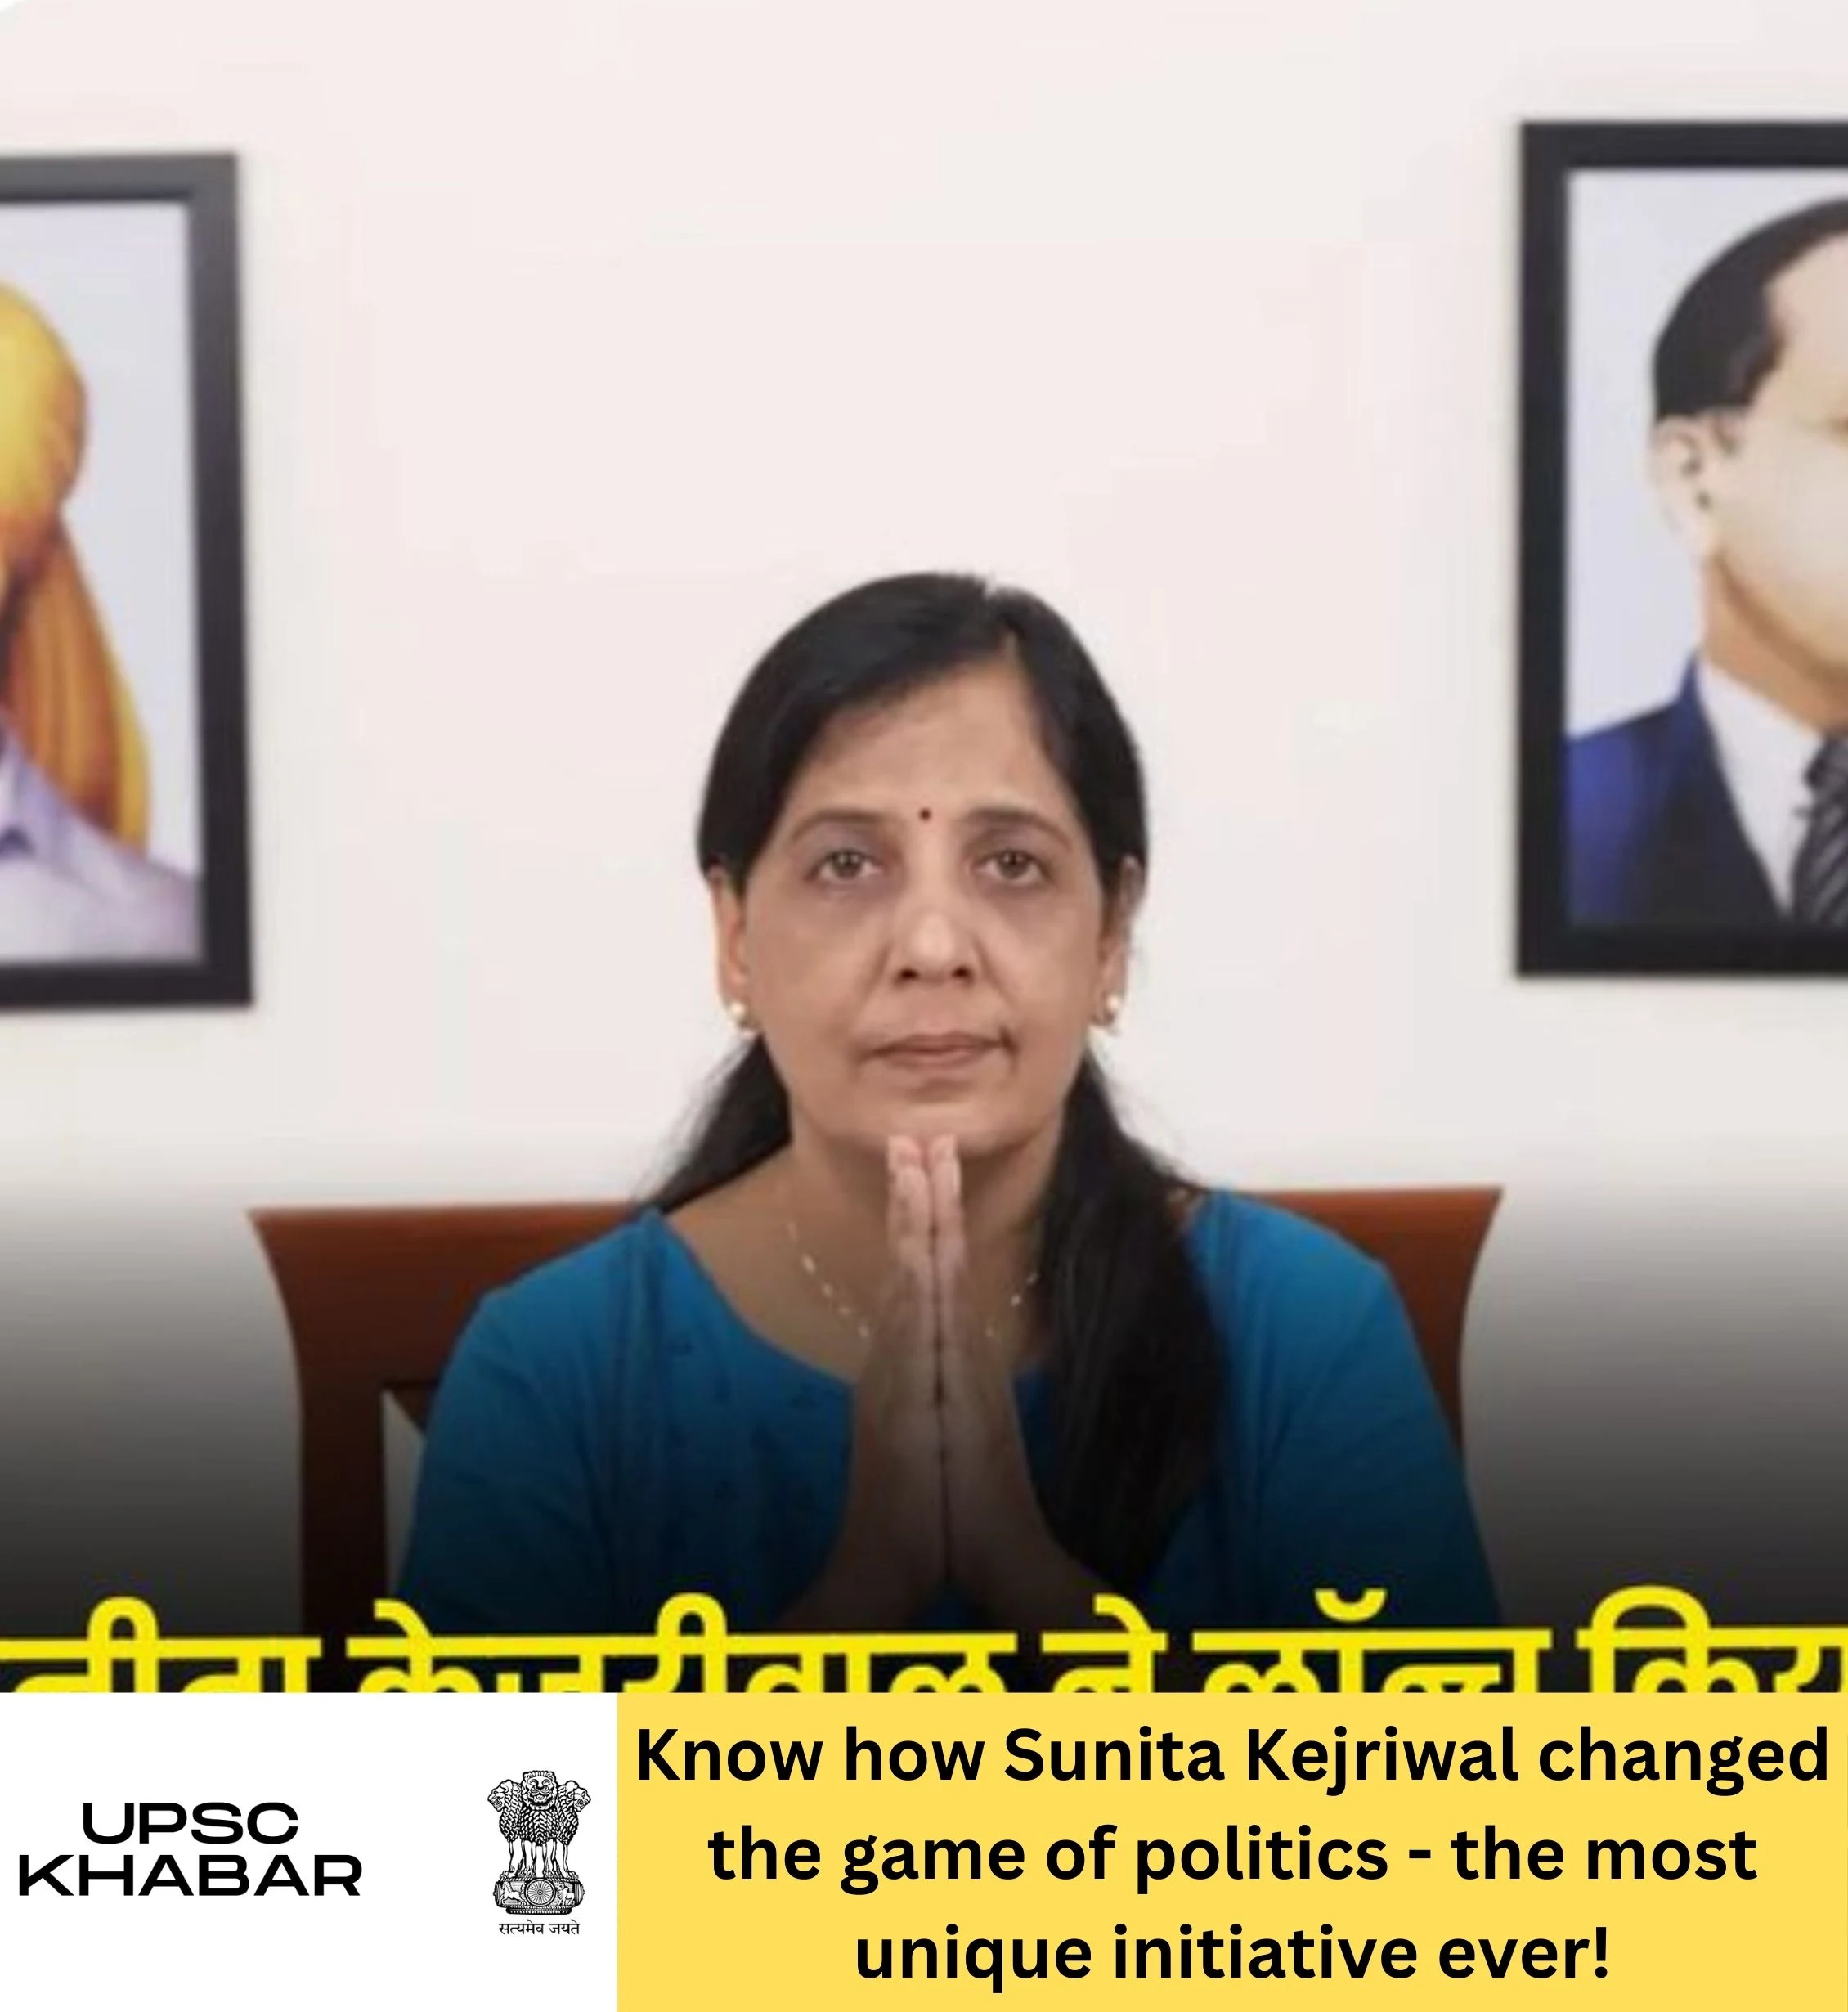 Know how Sunita Kejriwal changed the game of politics - the most unique initiative ever!